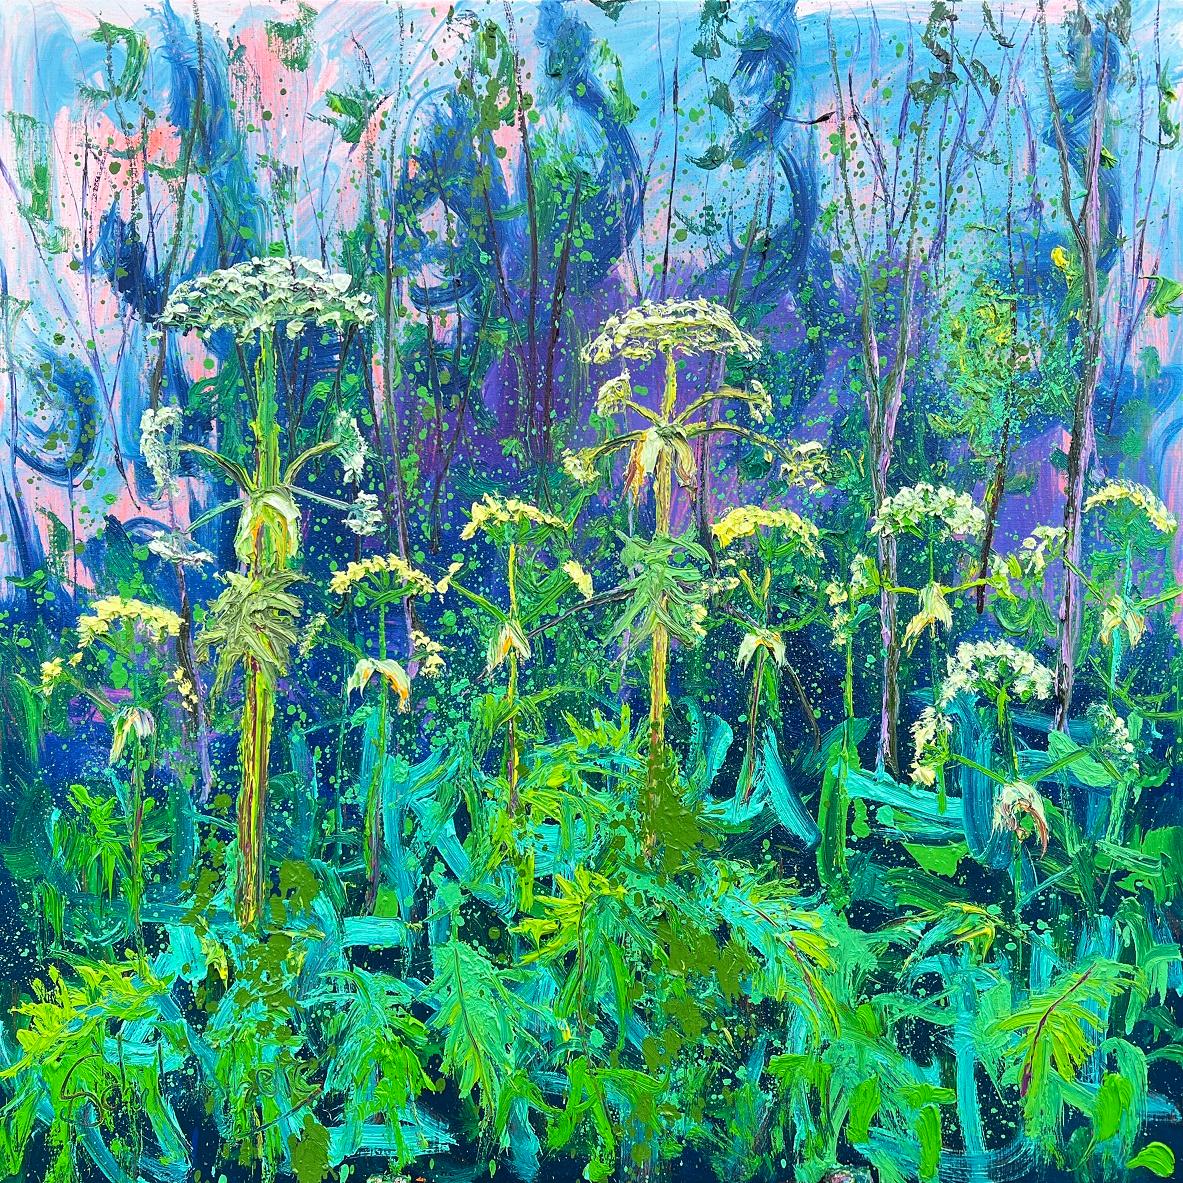 Gertjan Scholte-Albers Landscape Painting - Ultramarine Hogweed Oil Painting on Canvas Nature Outdoor Painter Plein Air